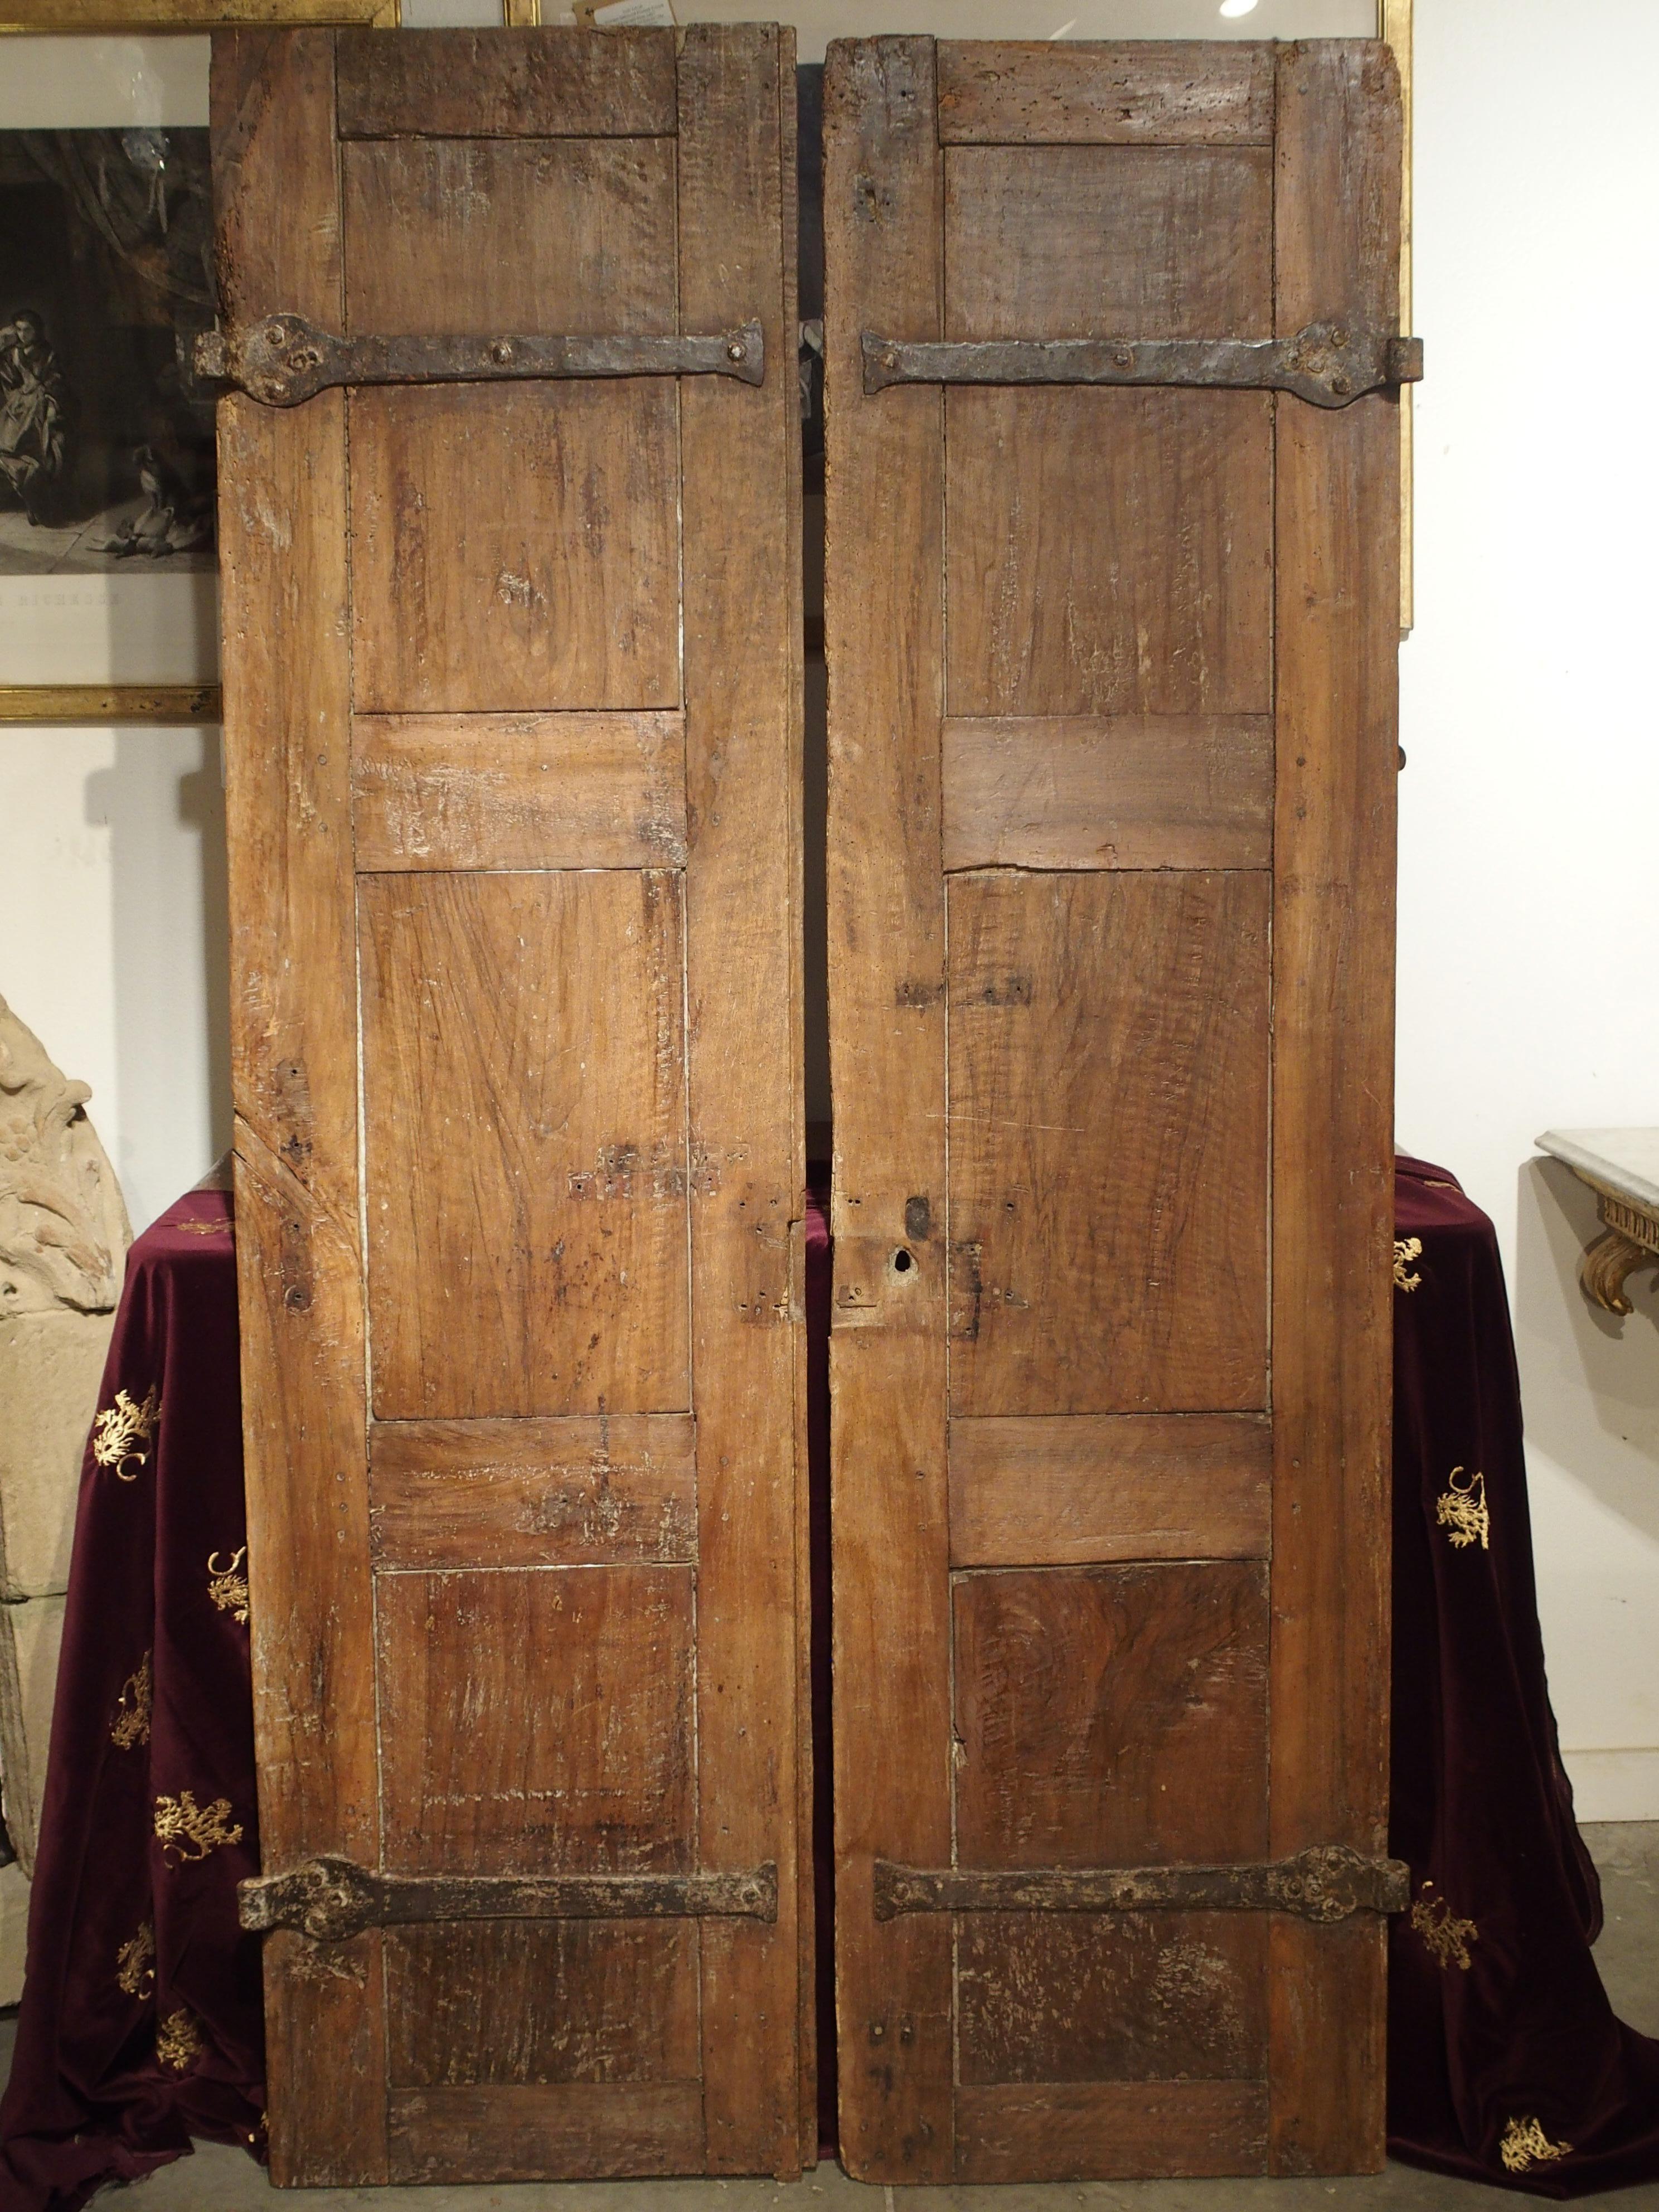 This is a pair of 18th century doors from Northern Italy, with large X-motif carvings and diamond shaped nailheads. They are carved out of an Italian Rovere wood, also known as durmast oak. The wood has a wonderful texture which has developed a warm